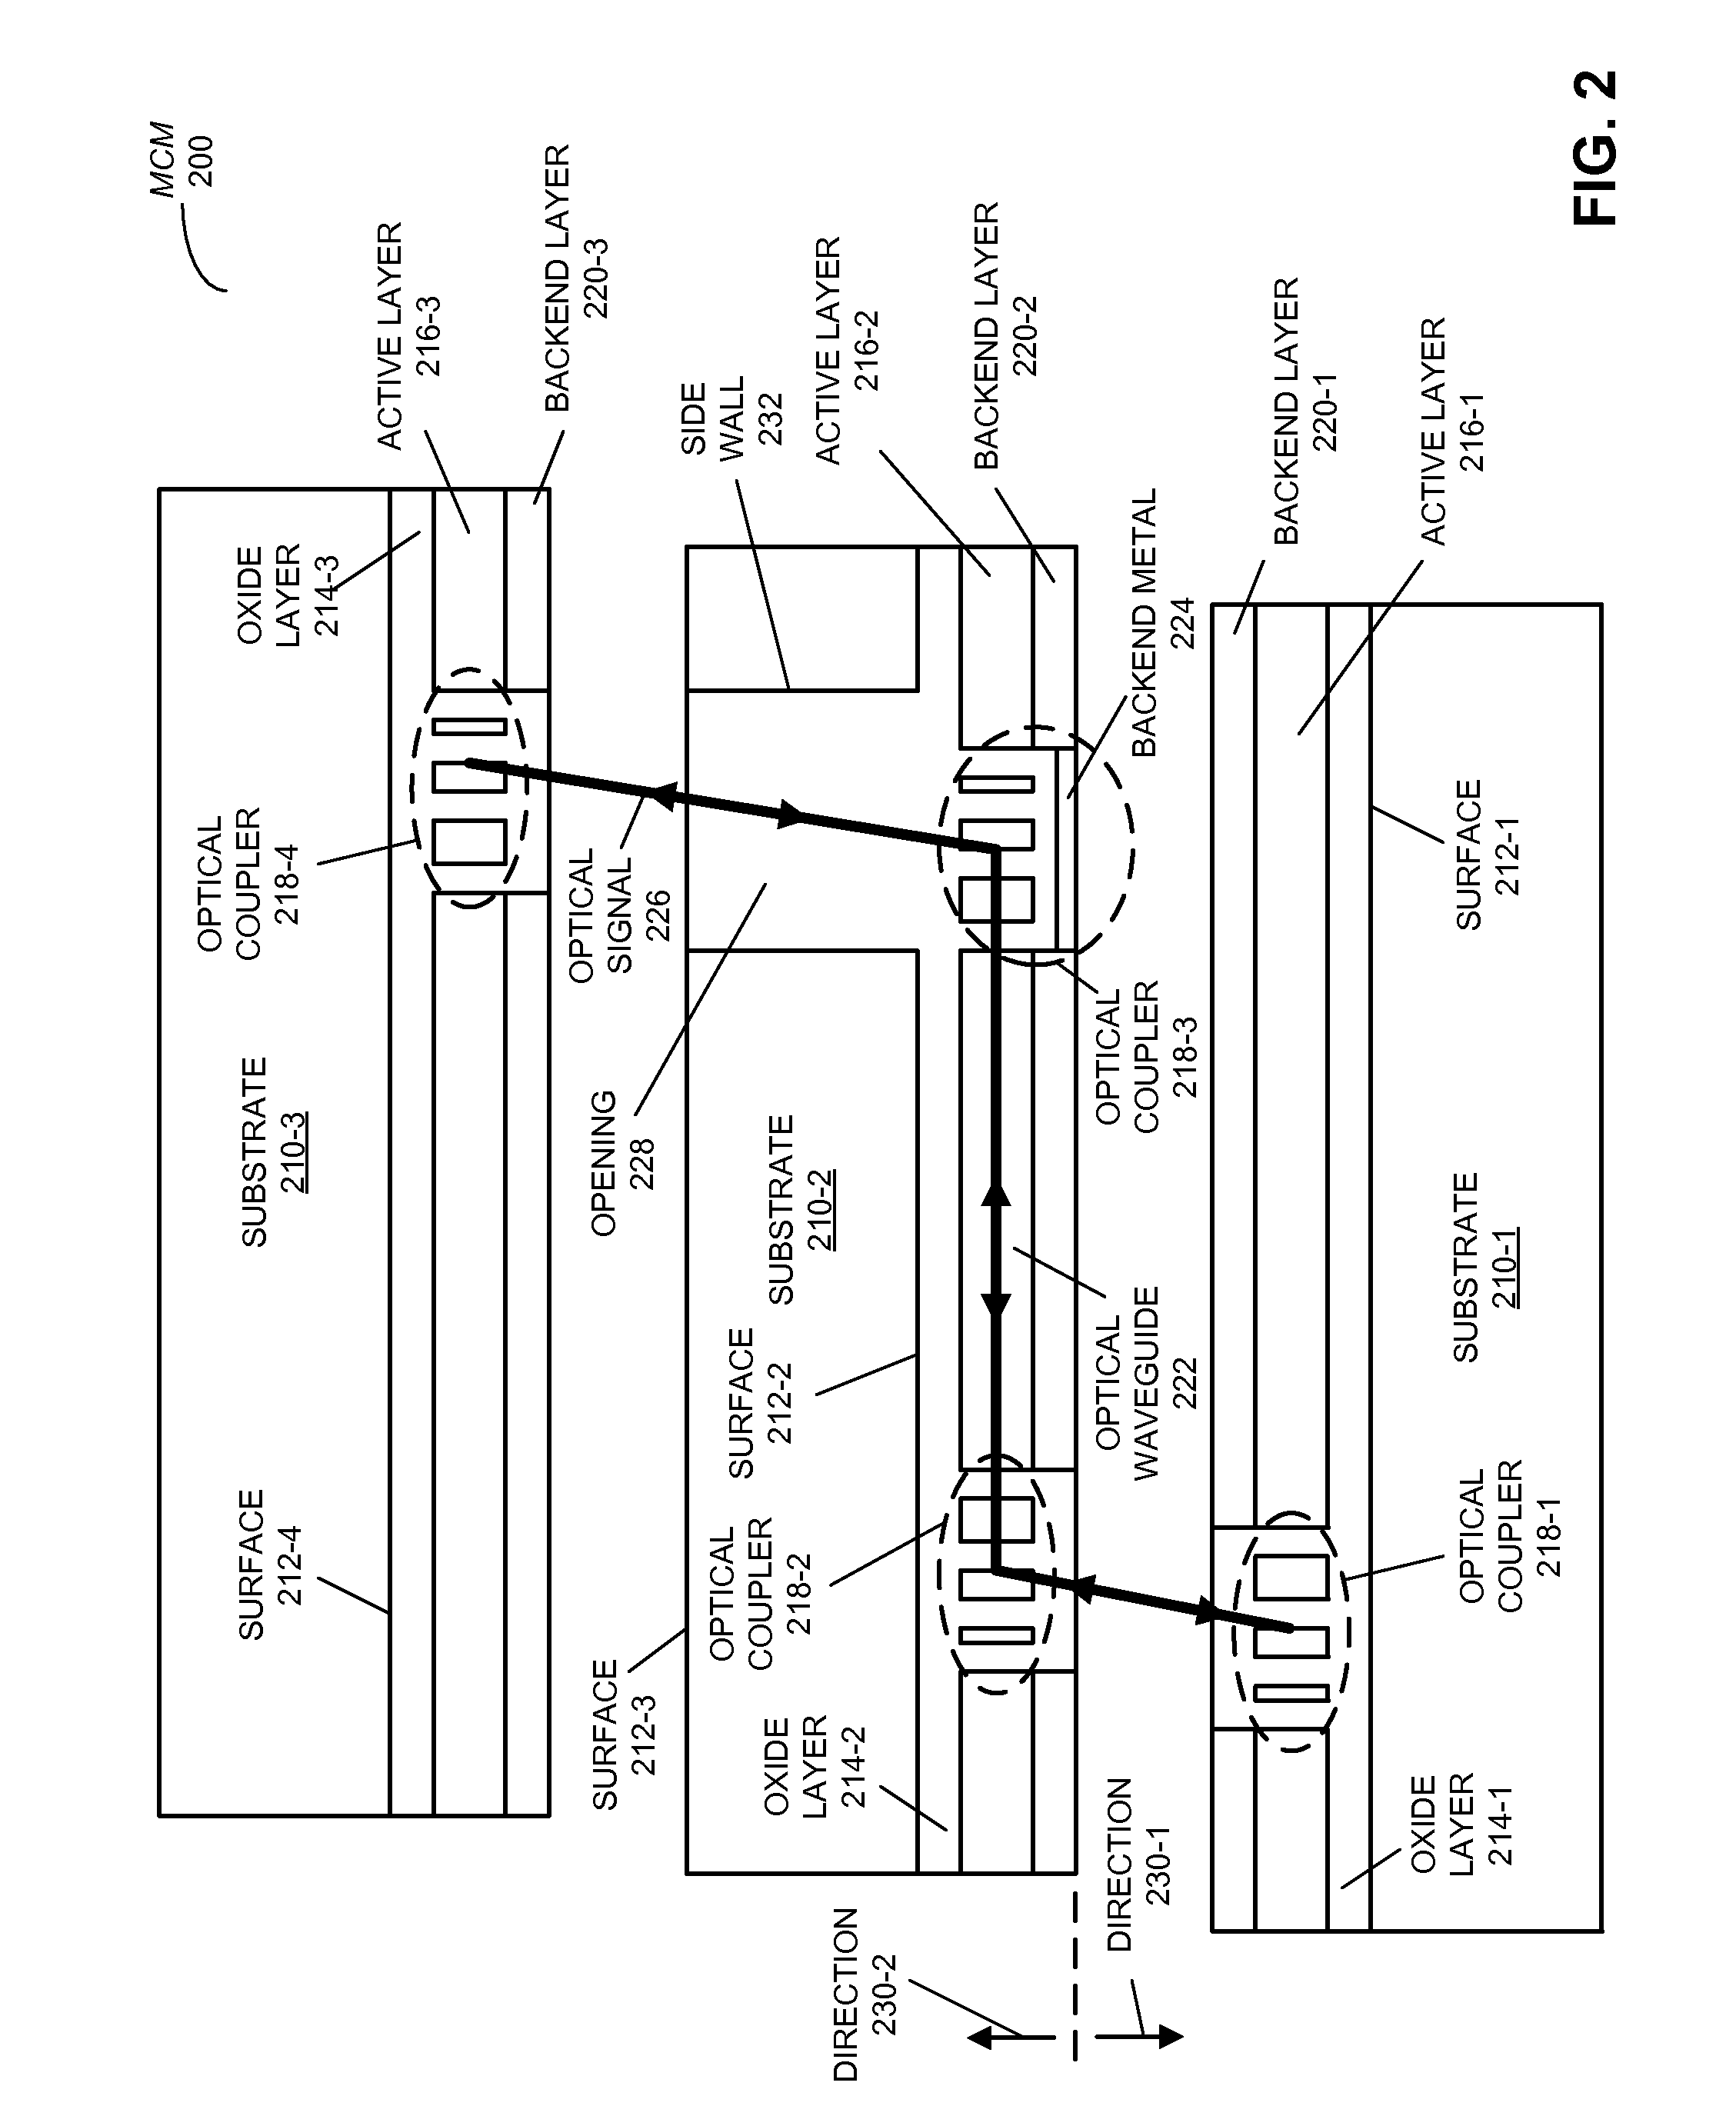 Three-dimensional macro-chip including optical interconnects